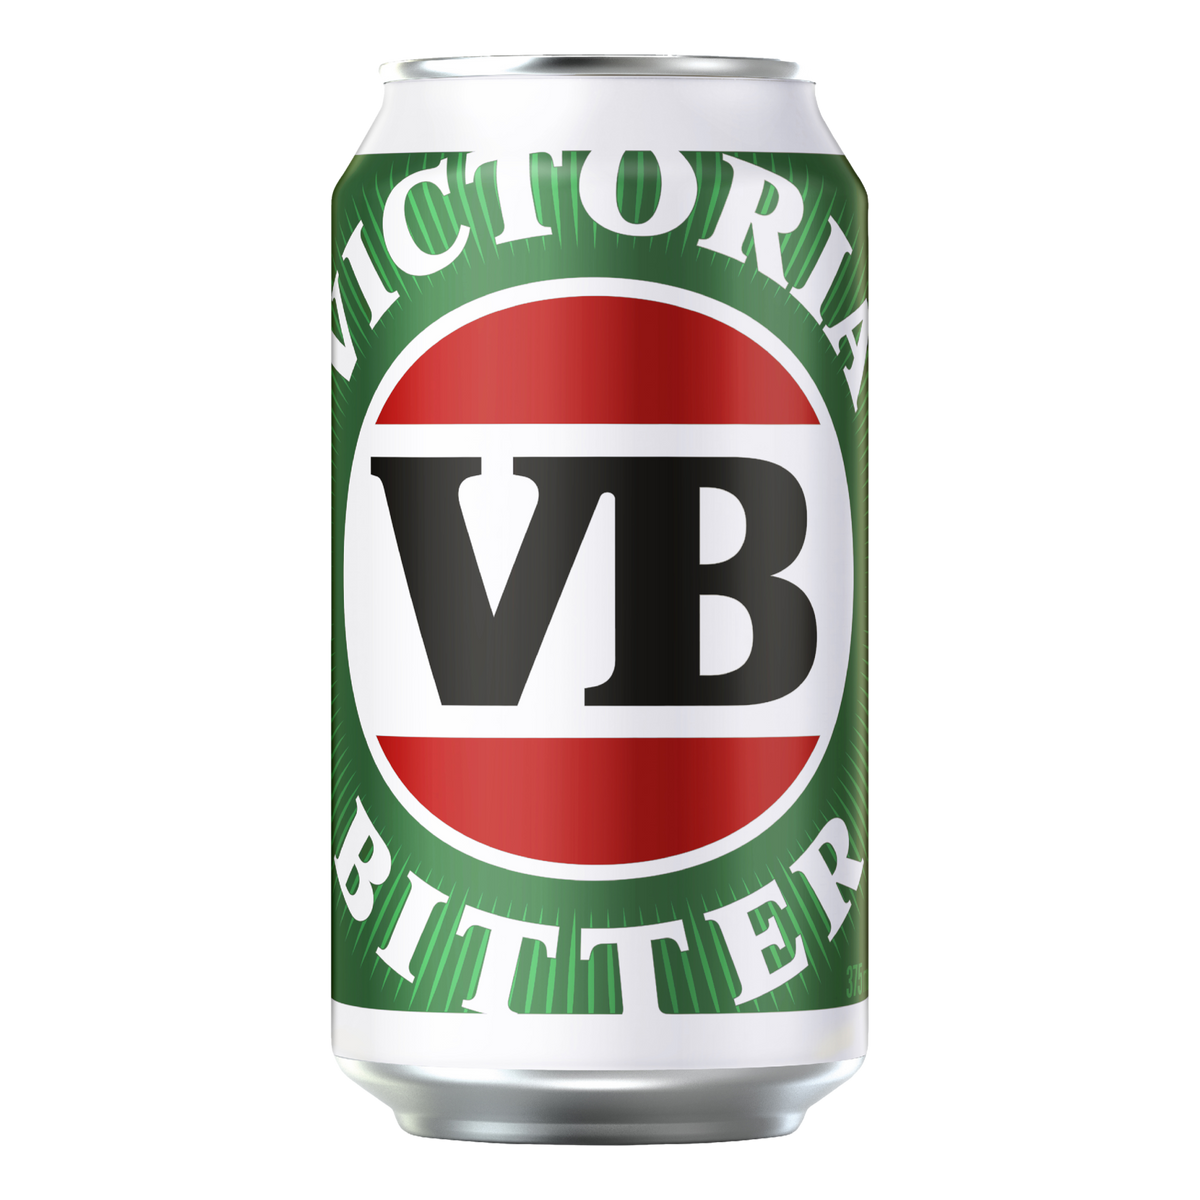 Victoria Bitter Lager 375ml Can Case of 24